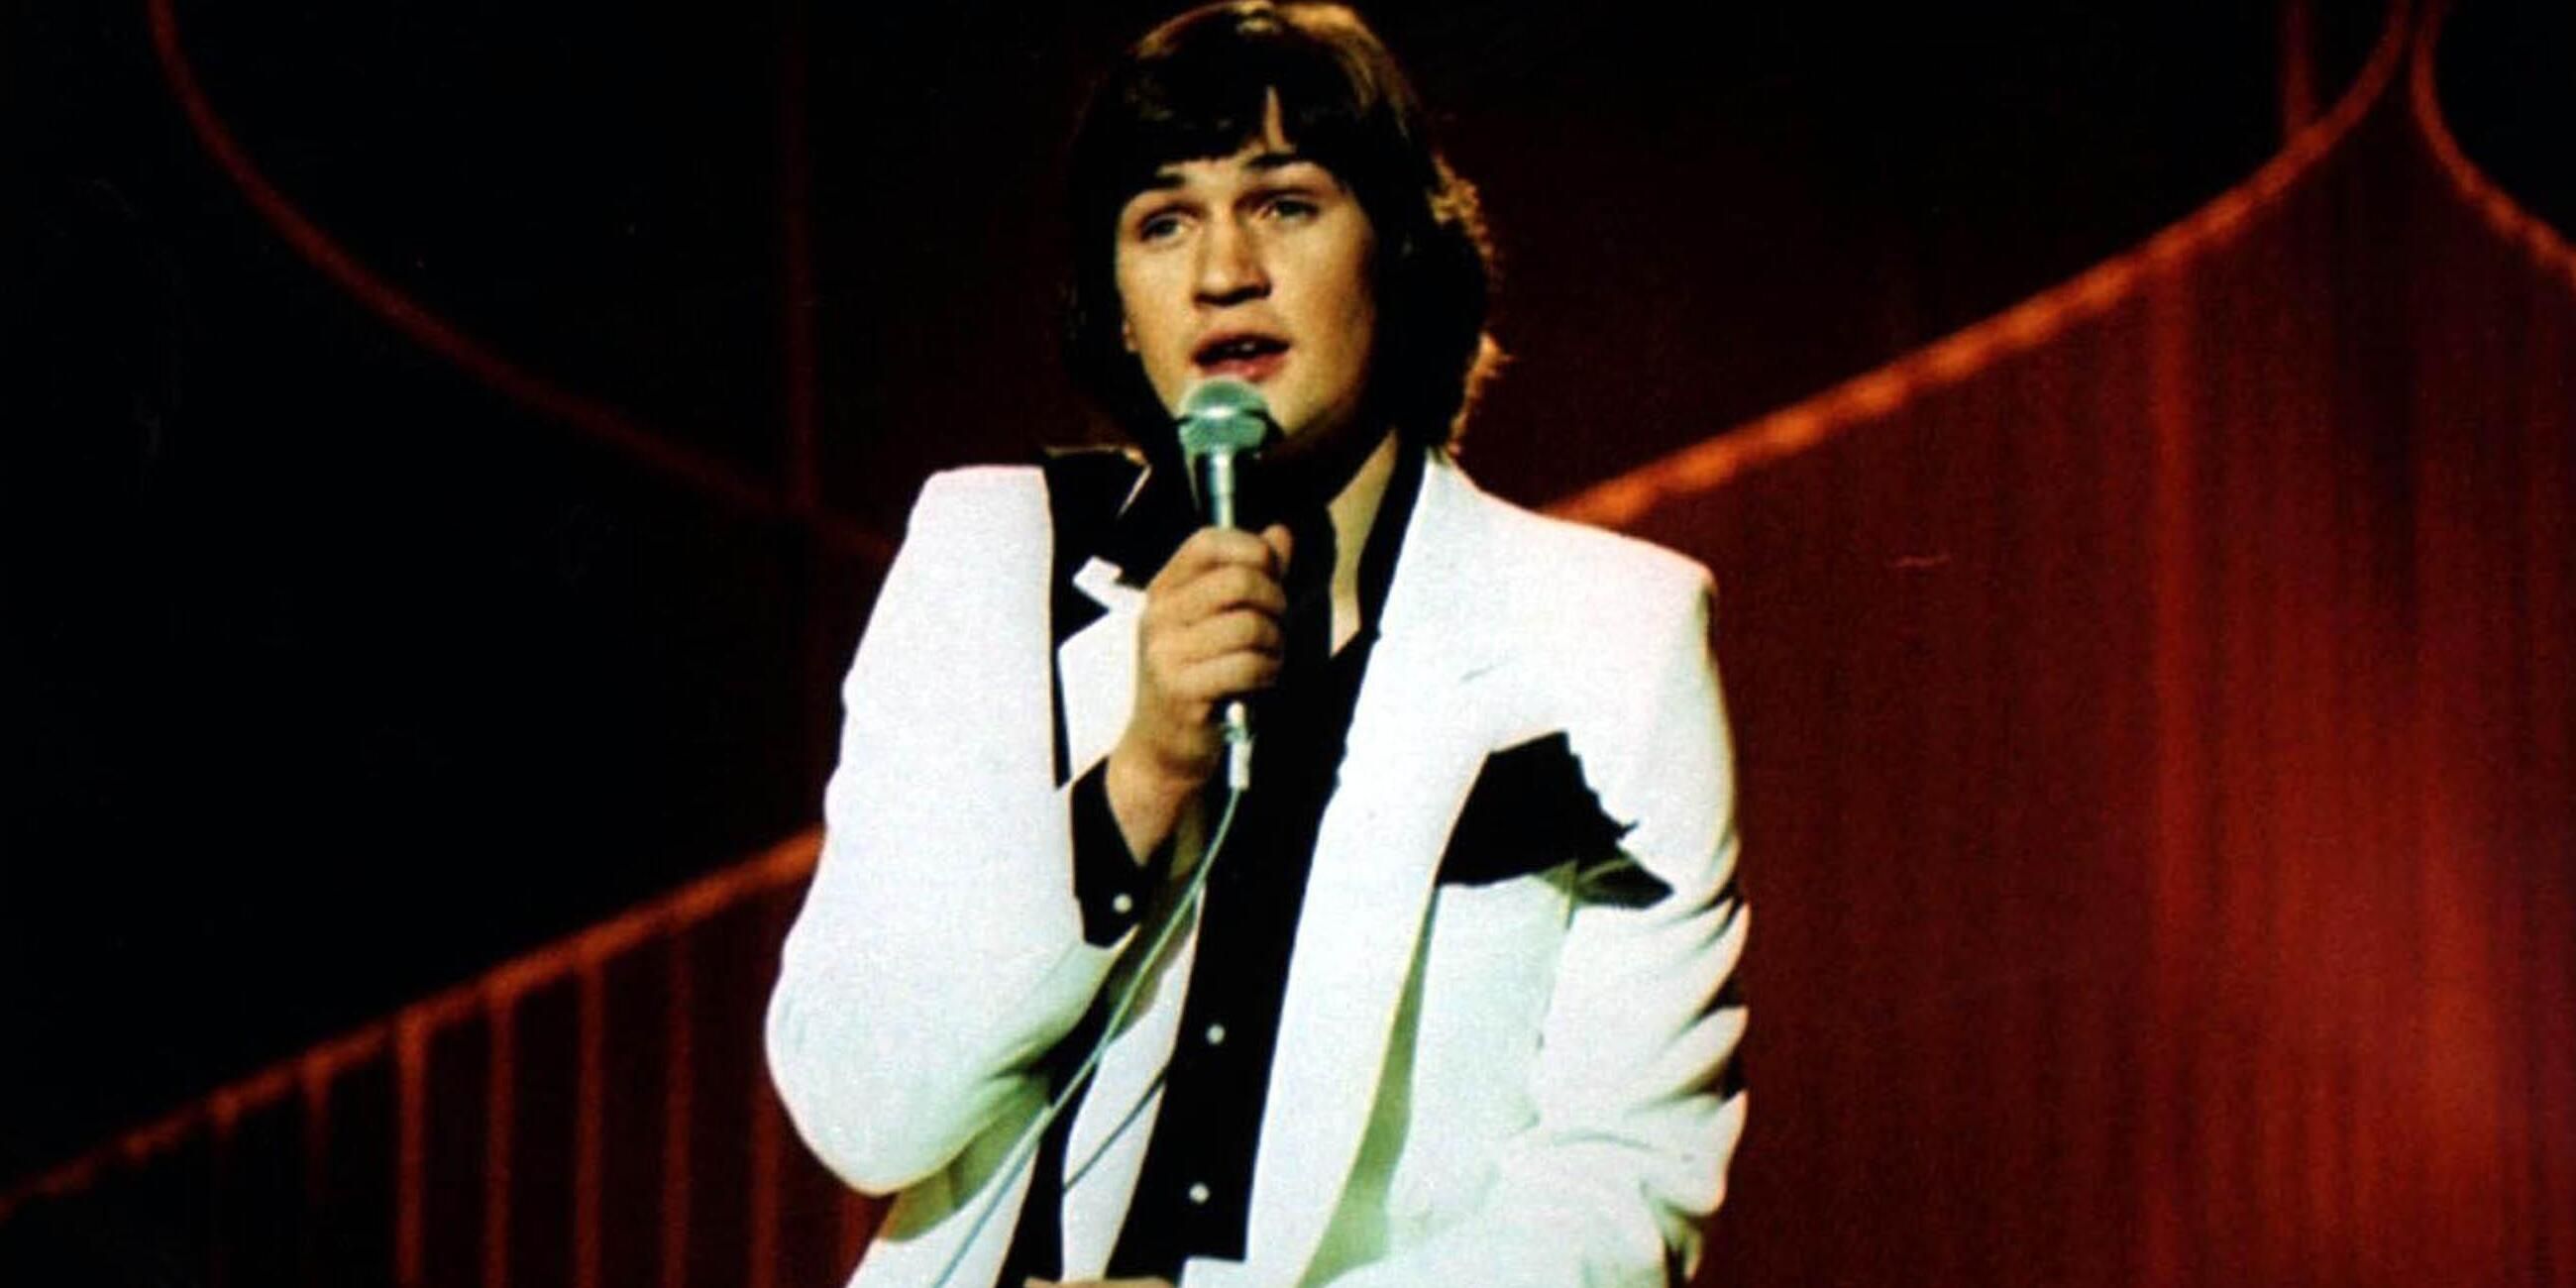 Johnny Logan holds a microphone on stage